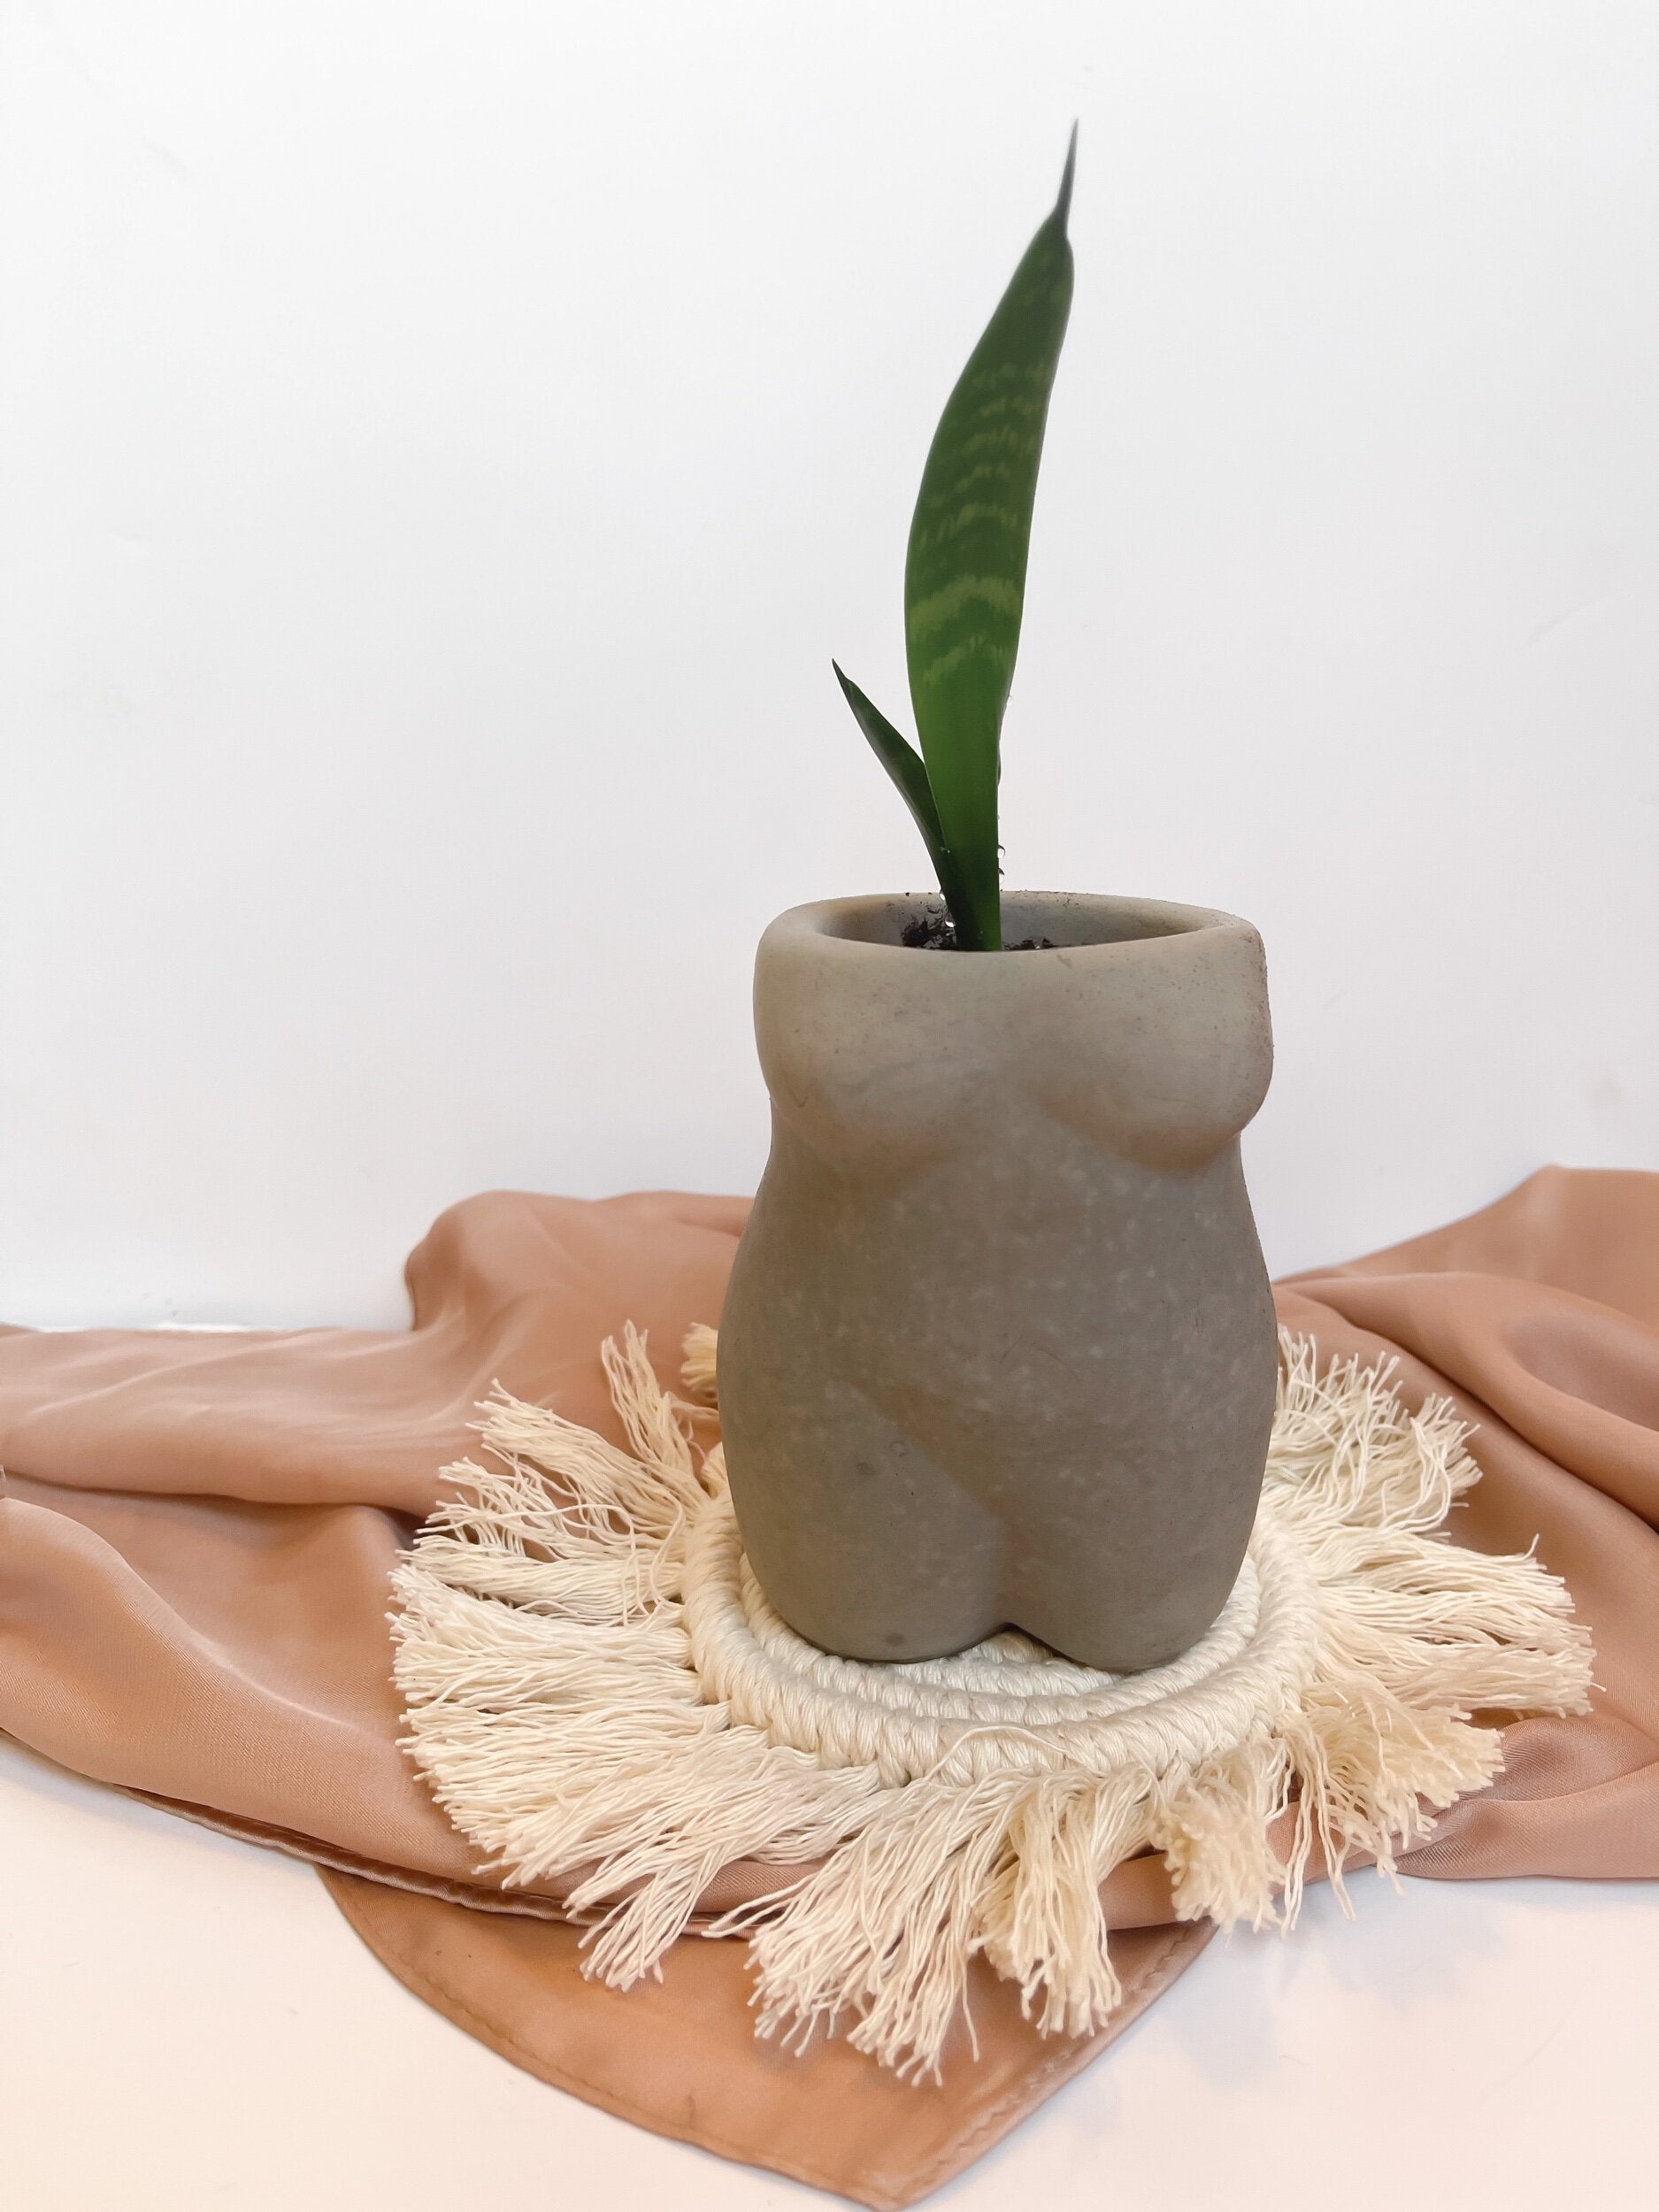 Naked Body Cement Planter